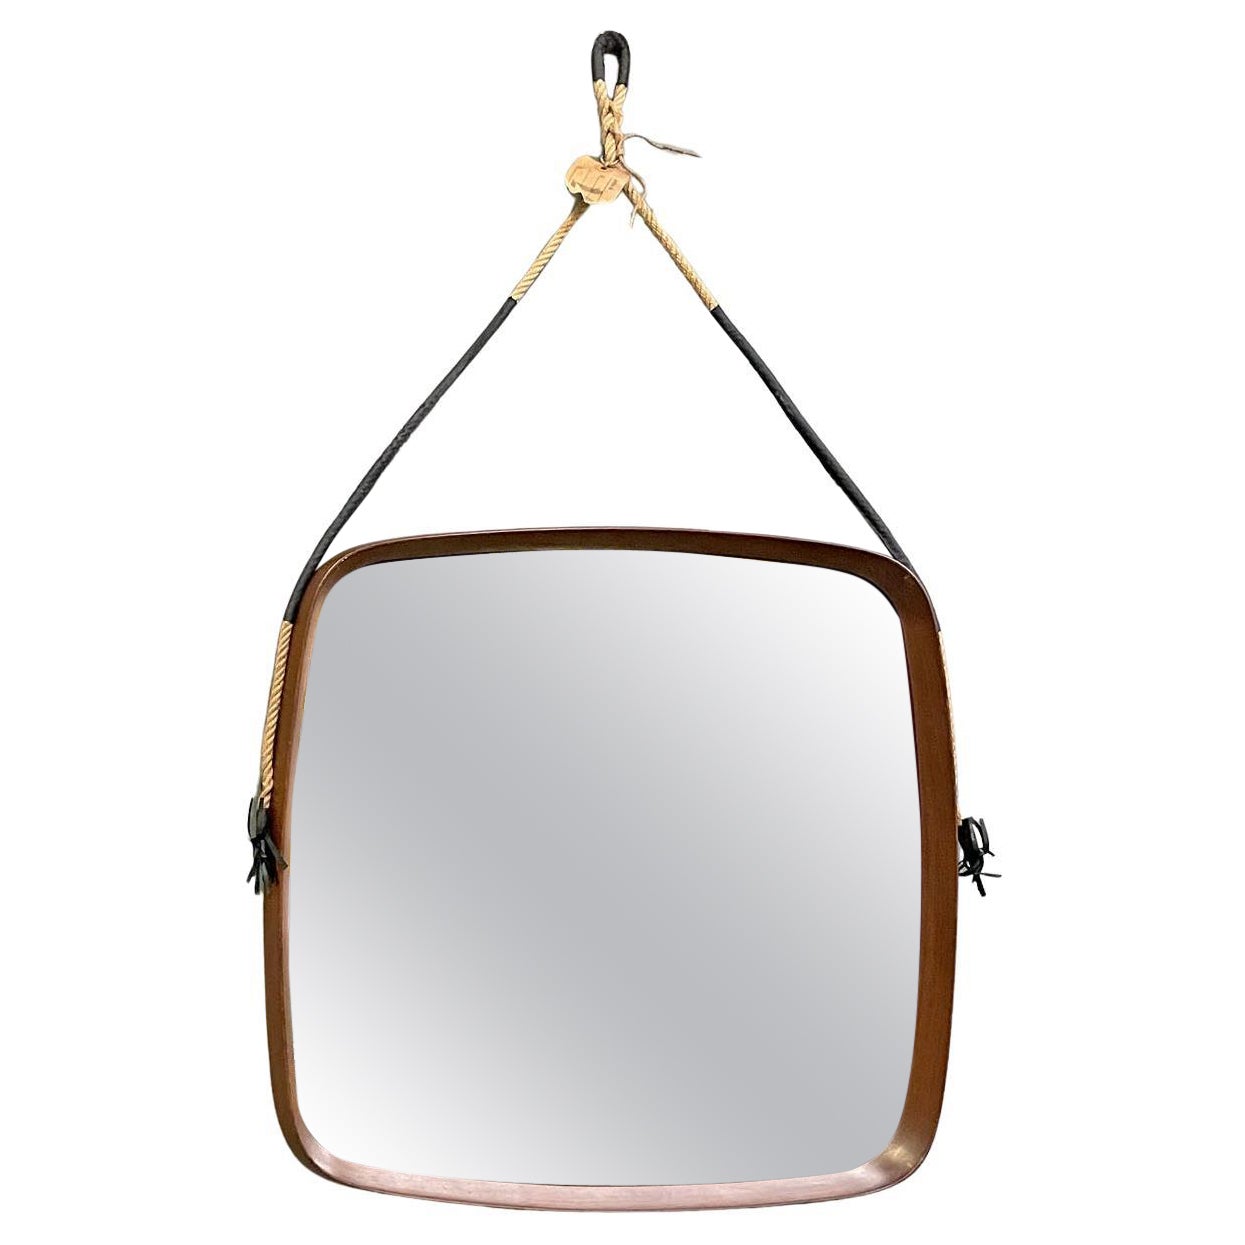 Italian mid-century modern squared wooden wall mirror with rope, 1960s